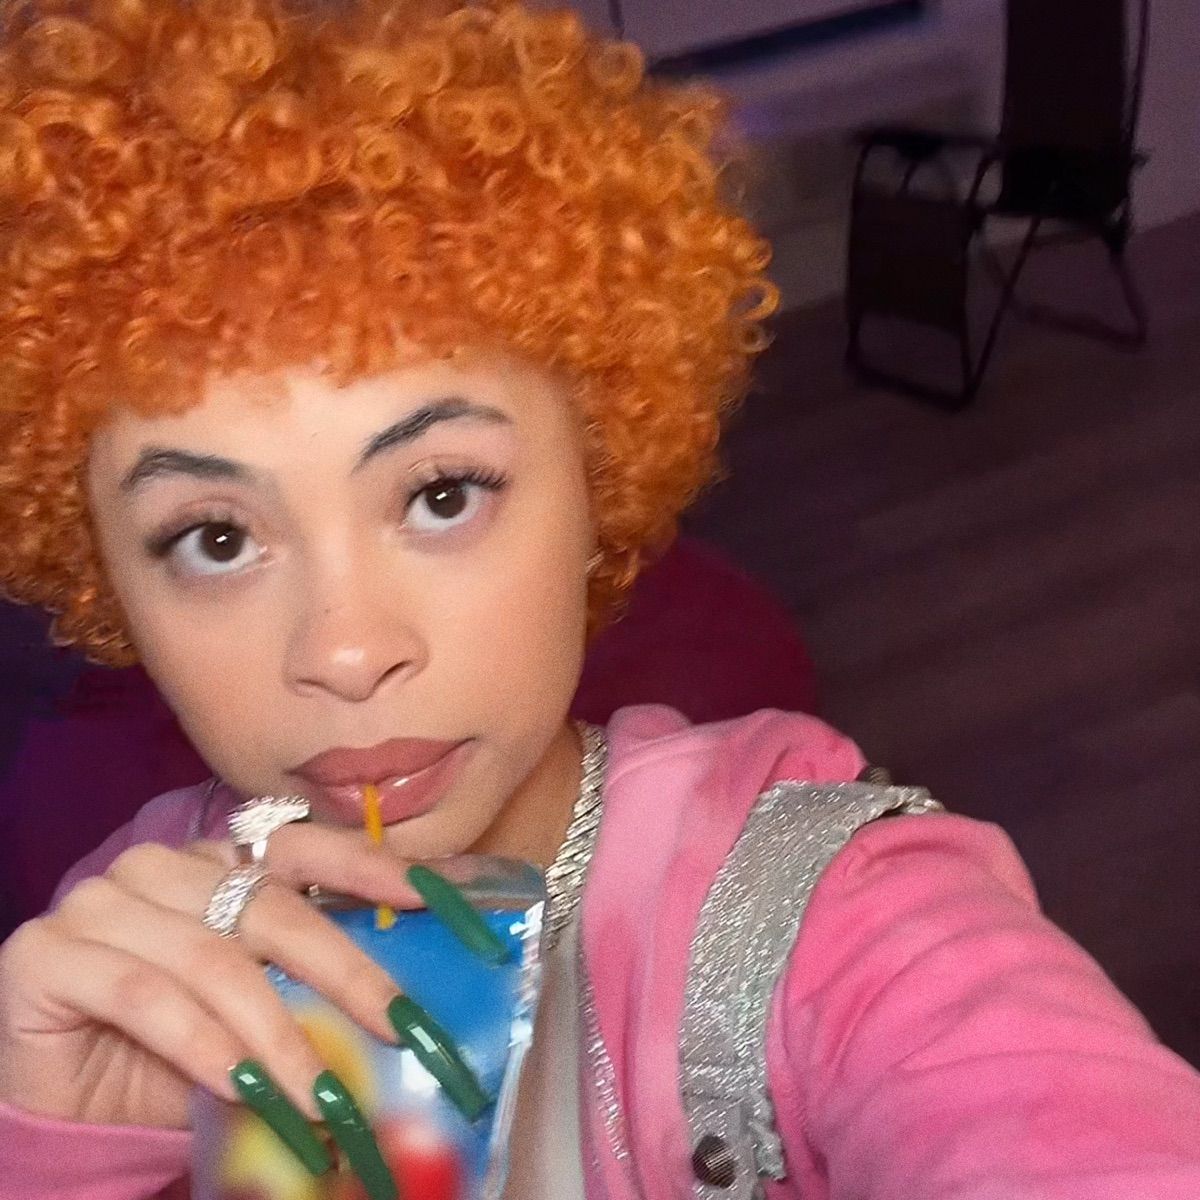 A selfie of a woman with orange hair and pink jacket holding a colorful drink. - Ice Spice